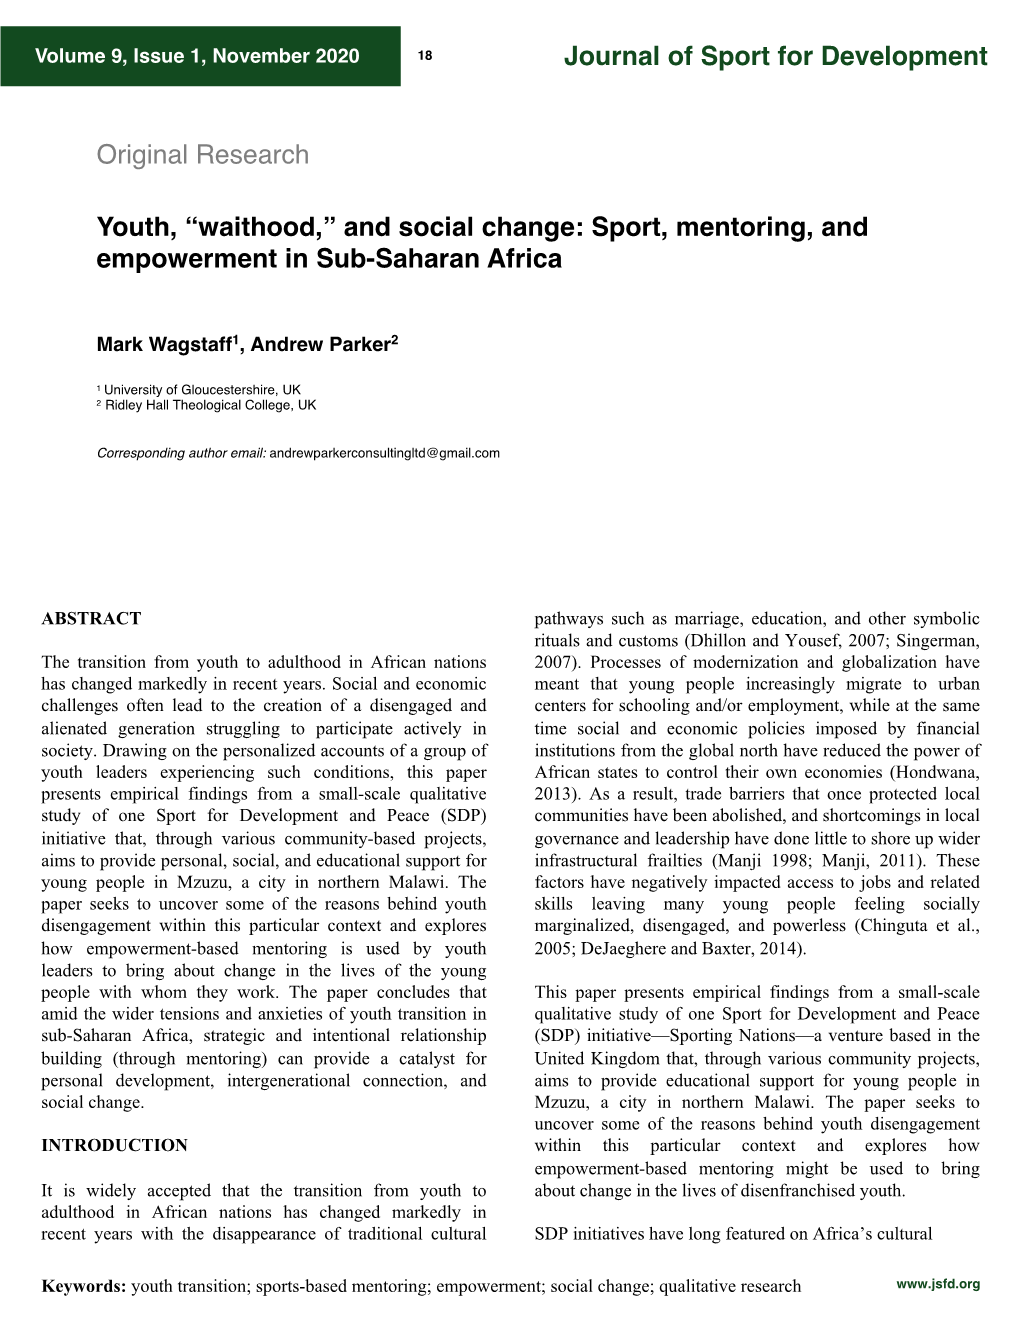 Waithood,” and Social Change: Sport, Mentoring, and Empowerment in Sub-Saharan Africa